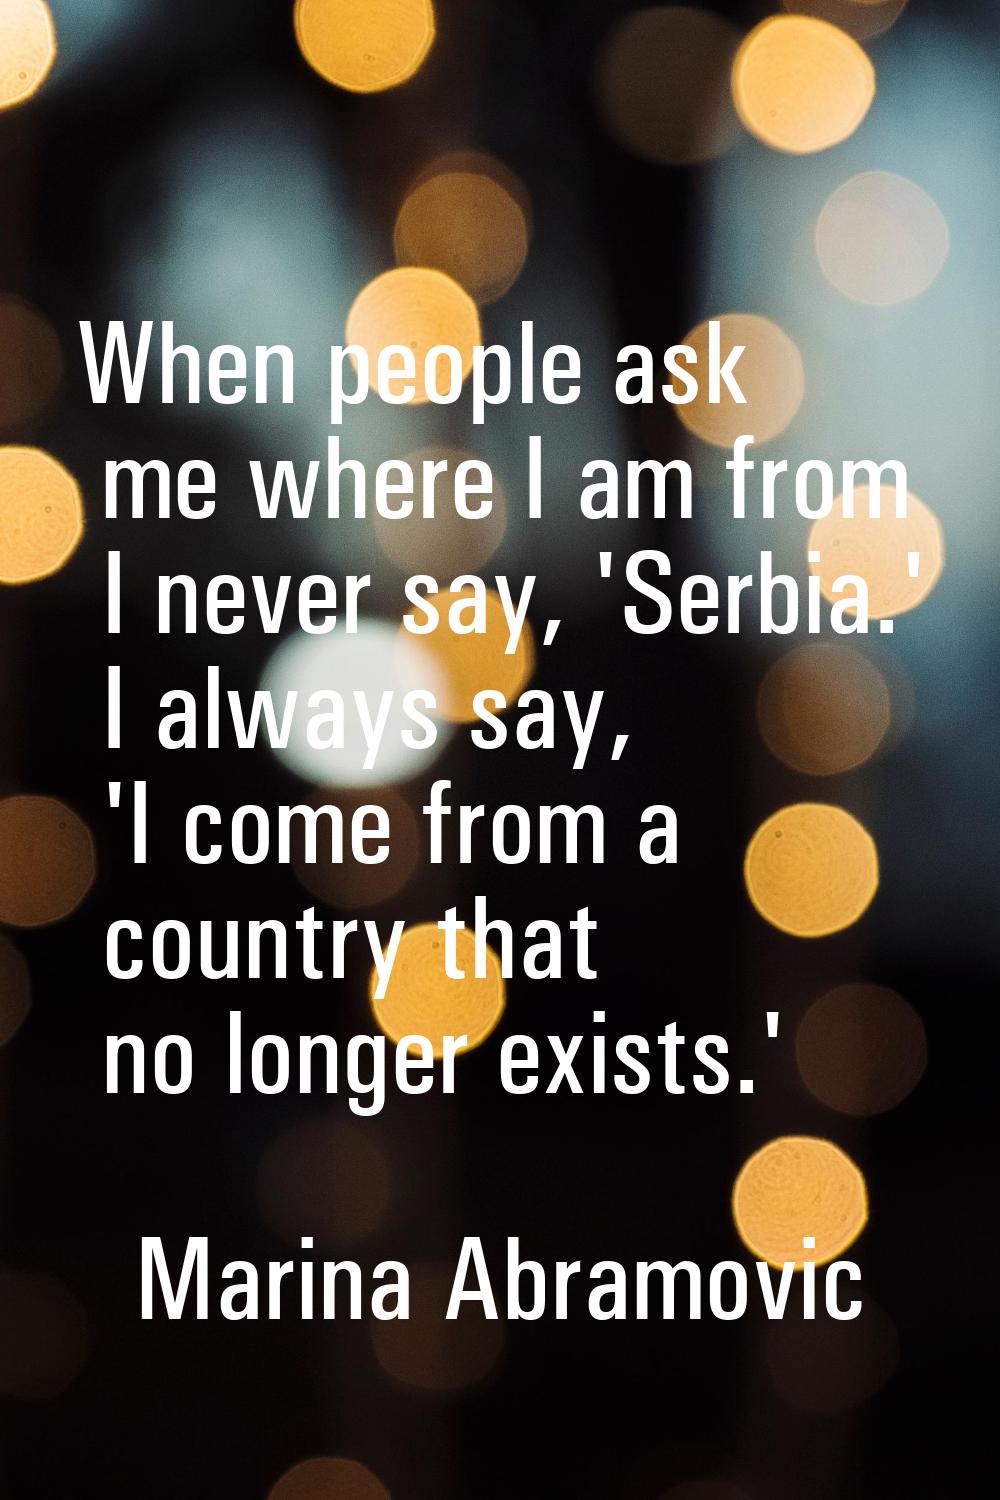 When people ask me where I am from I never say, 'Serbia.' I always say, 'I come from a country that